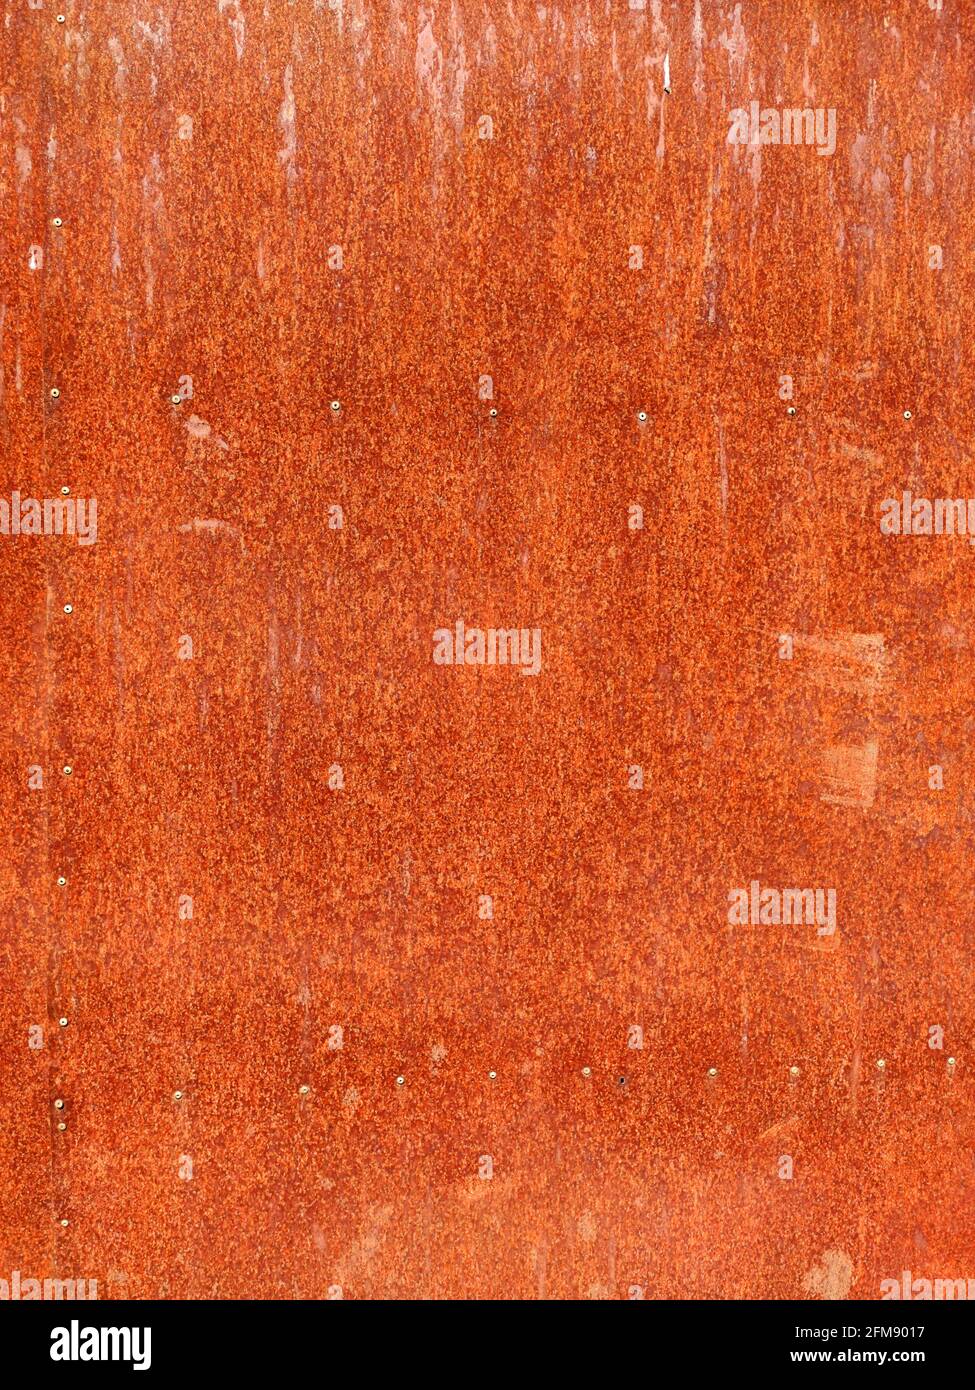 Rusty corrosion and oxidized background. Grunge rusted metal texture background. High resolution image of oxidized iron steel sheet wall. Stock Photo